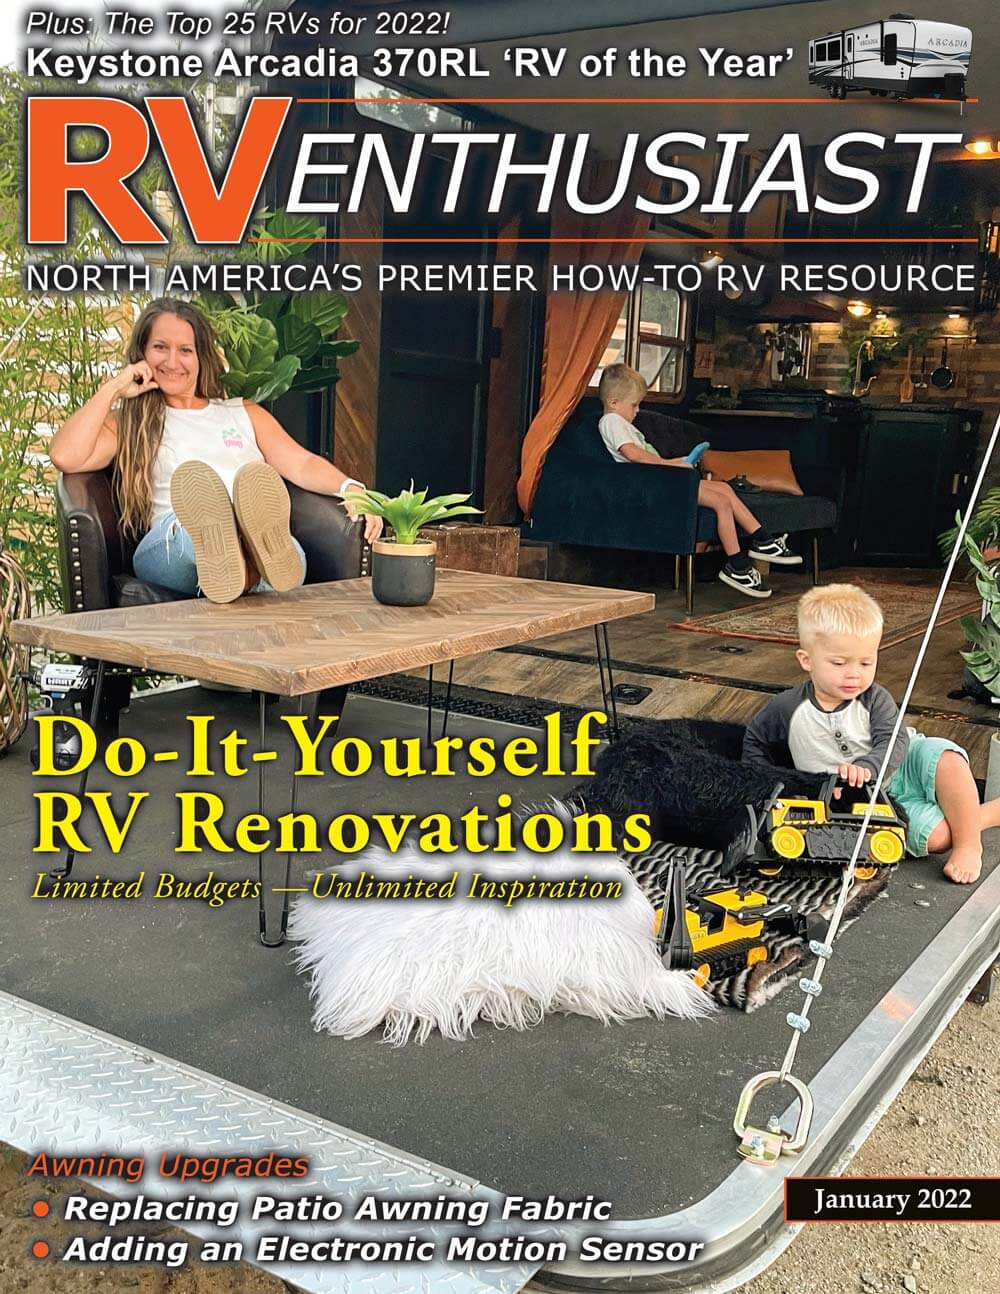 RV Enthusiast magazine cover featuring DIY renovations tips.